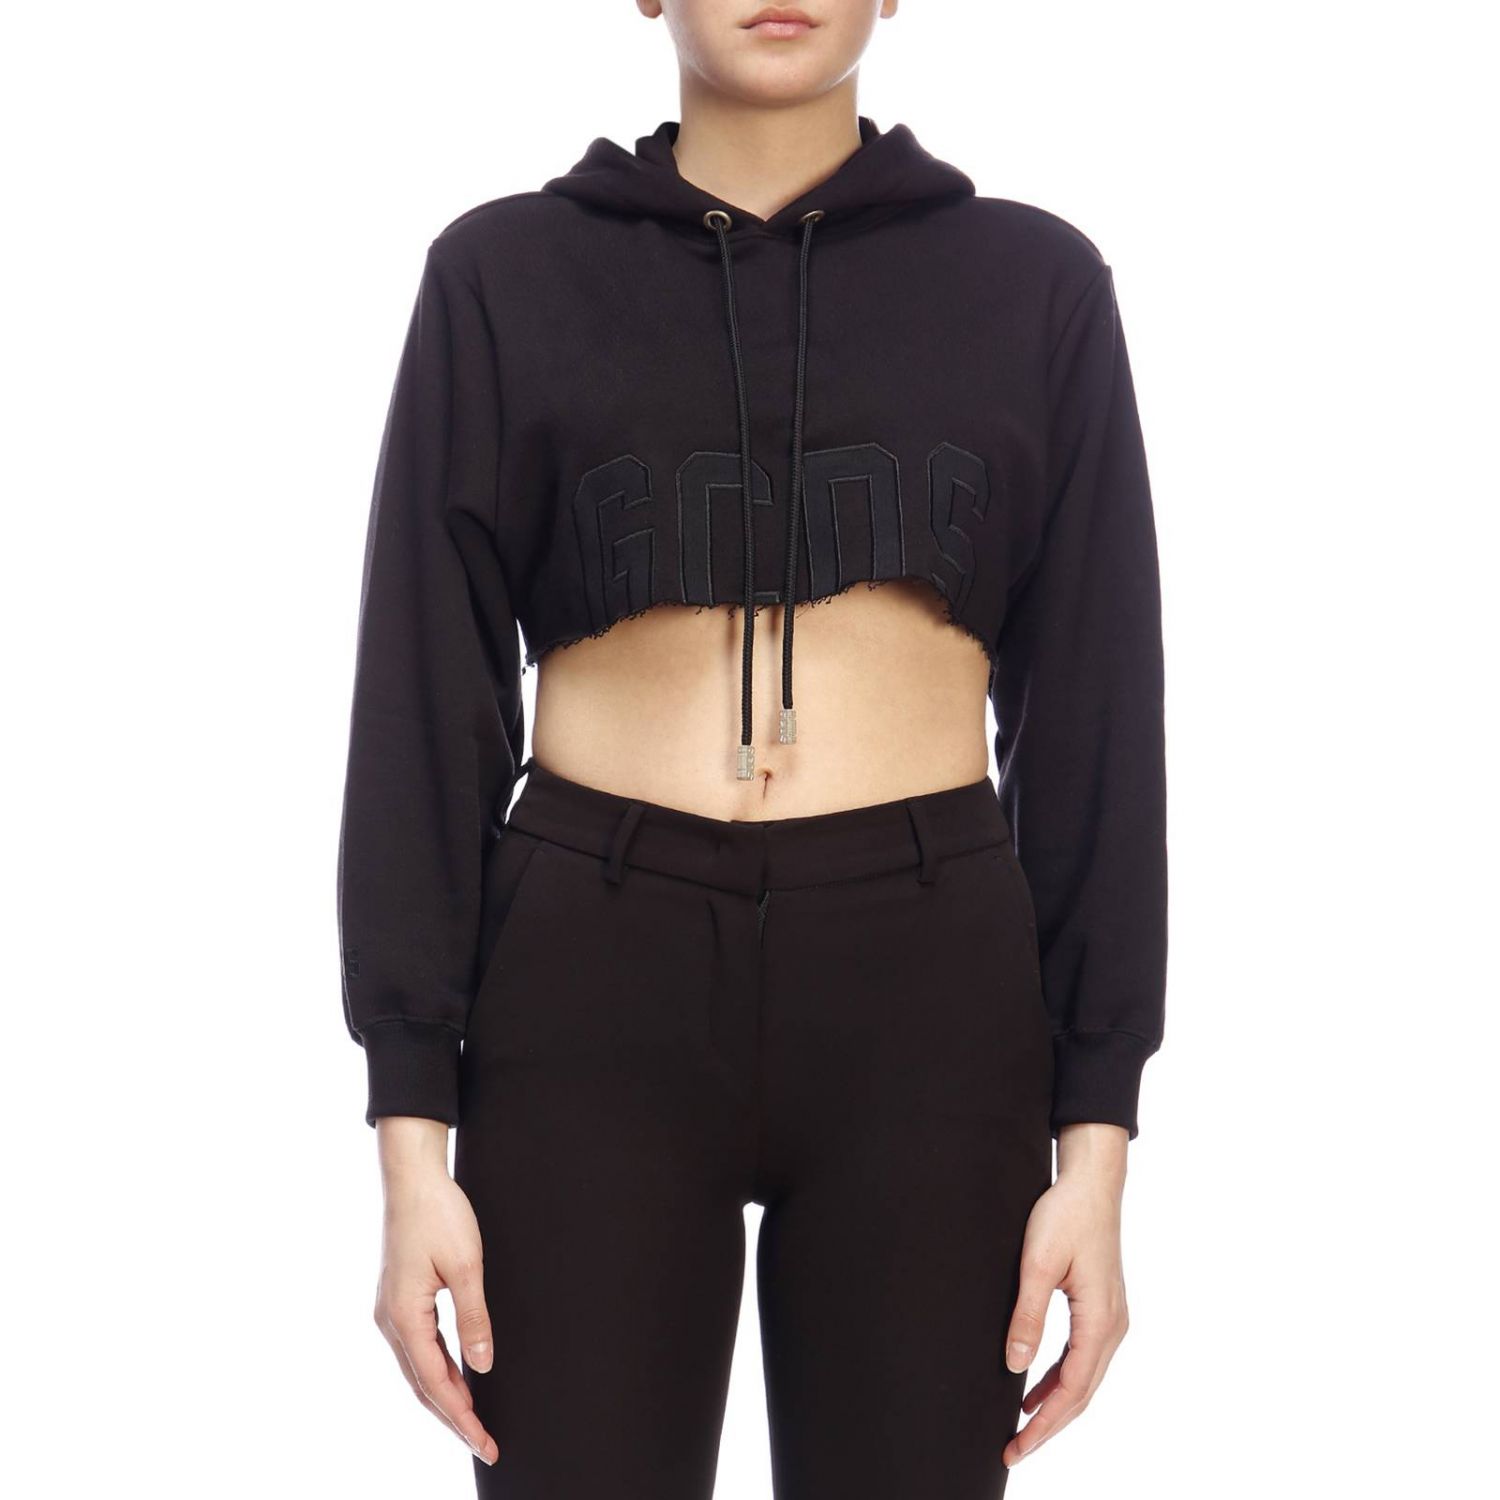 Gcds Outlet: sweater for woman - Black | Gcds sweater SS19W020026 ...